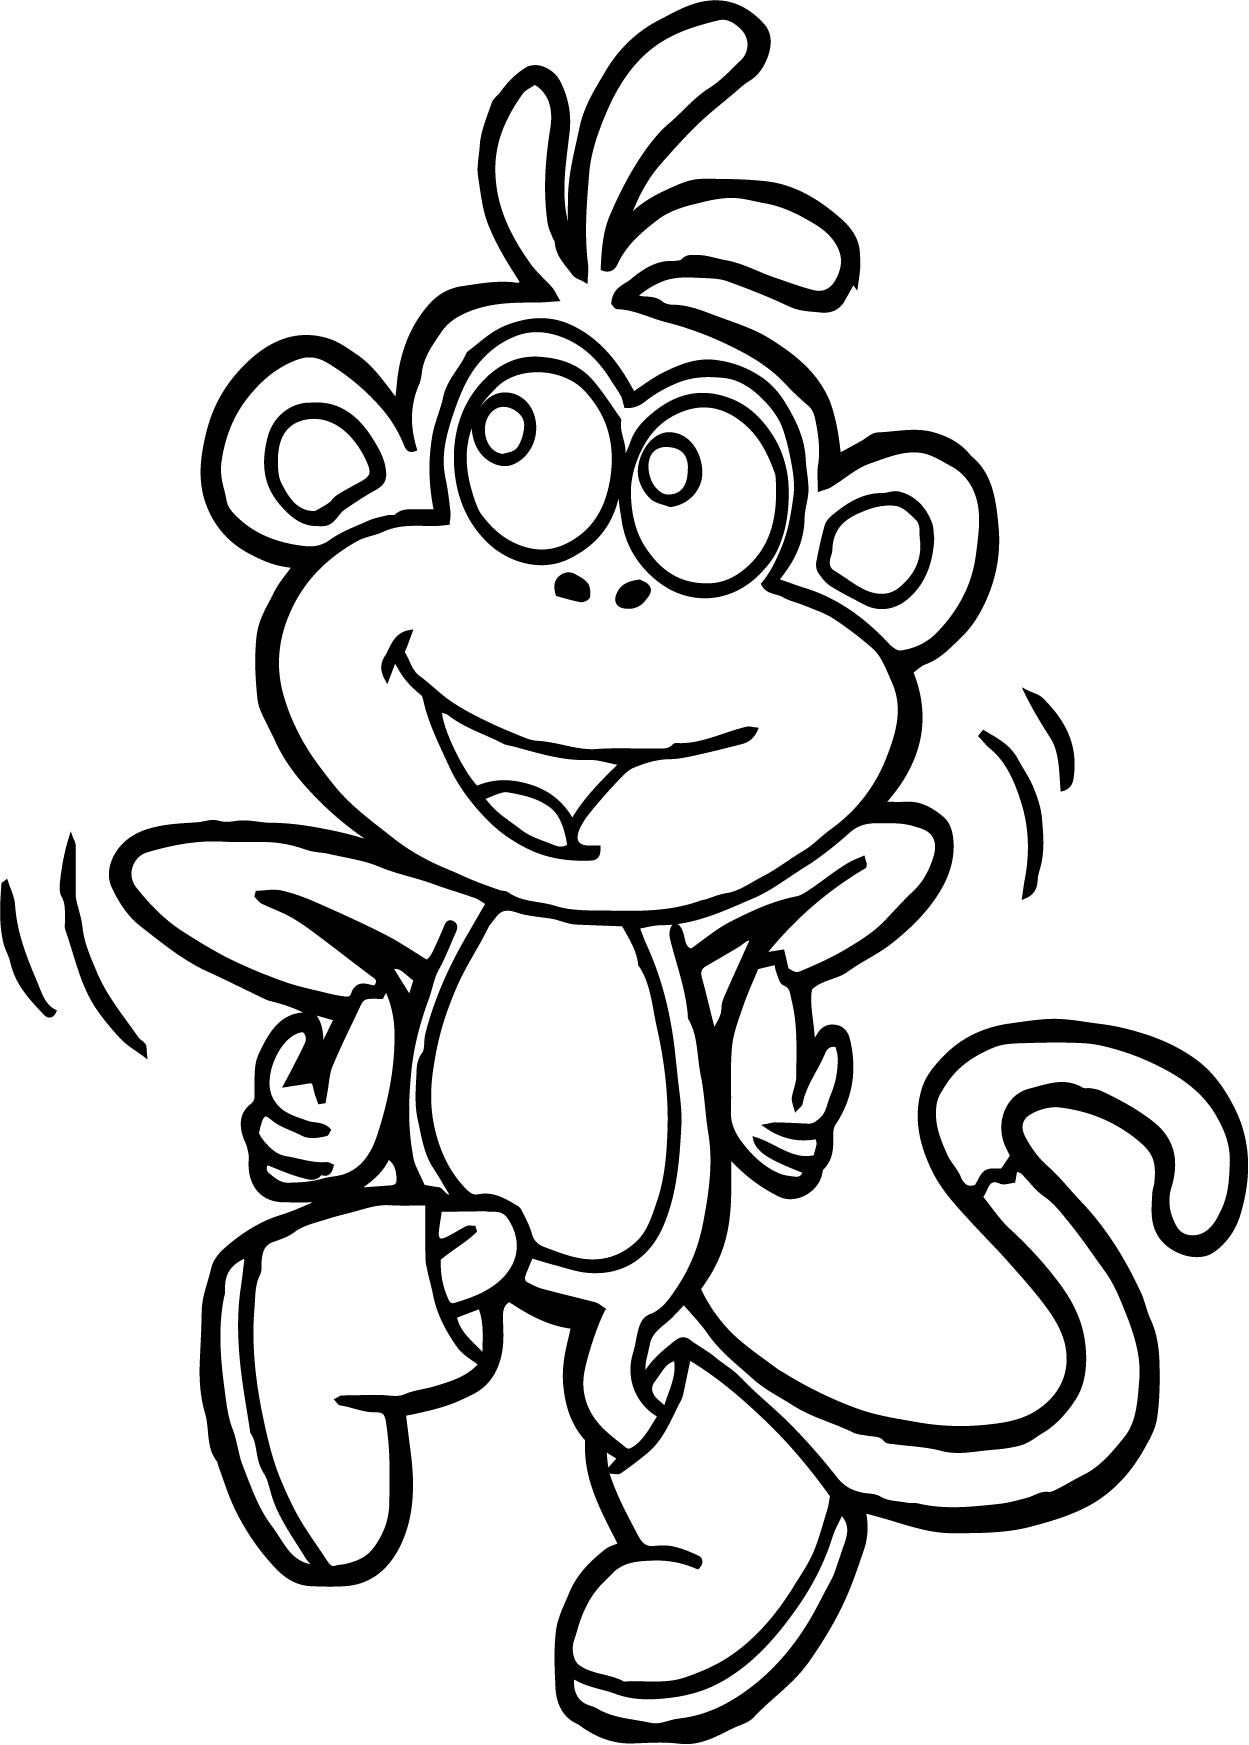 Coloring Book Pages Monkey
 Dora Monkey Coloring Page